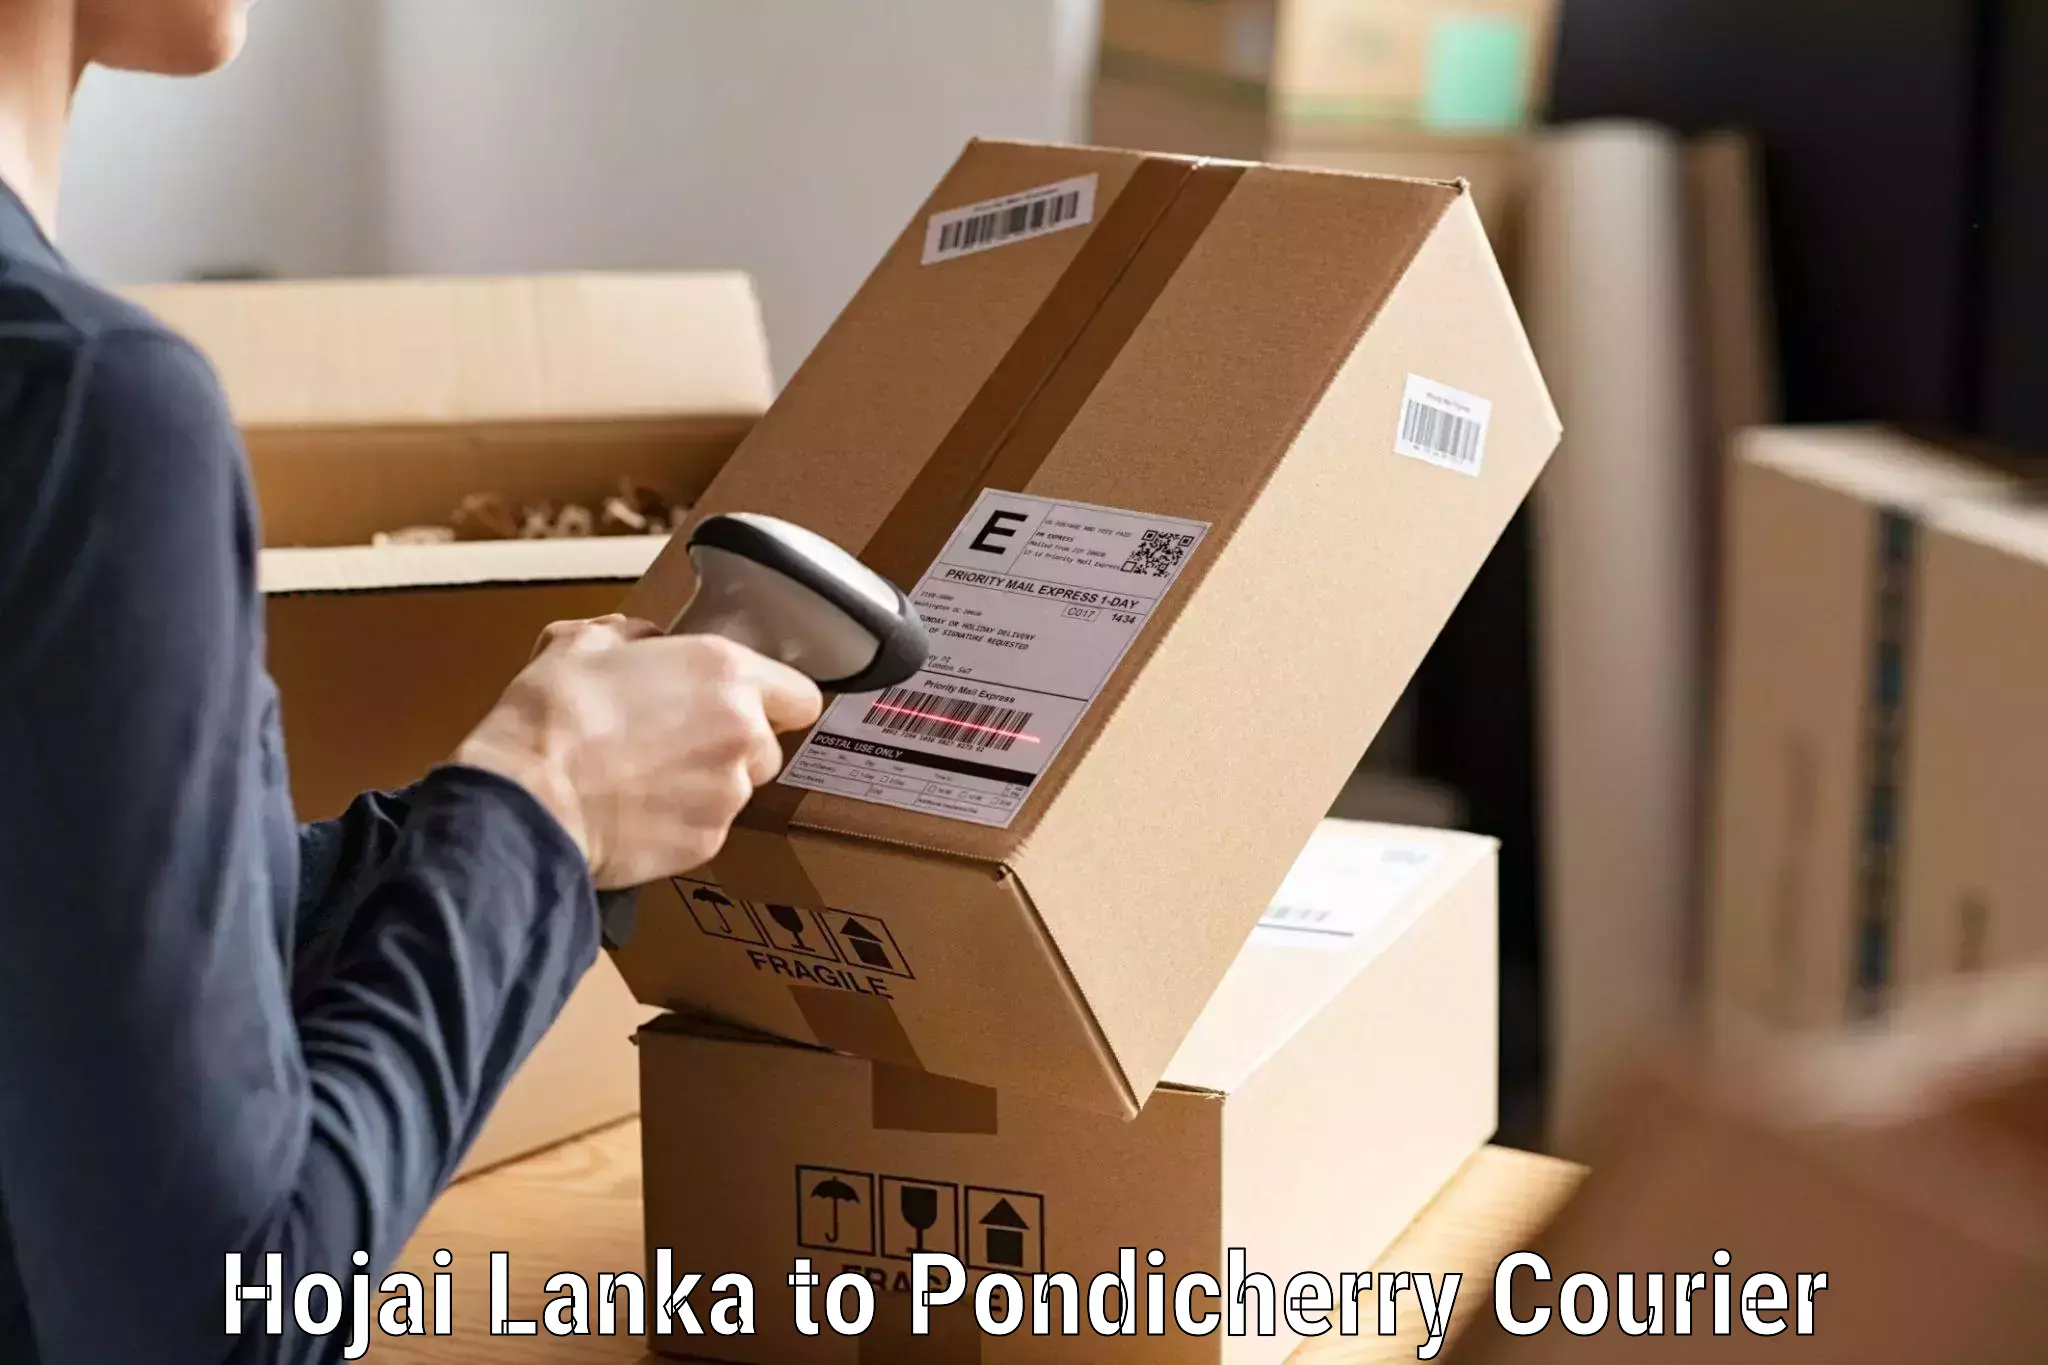 24-hour courier services Hojai Lanka to Metttupalayam